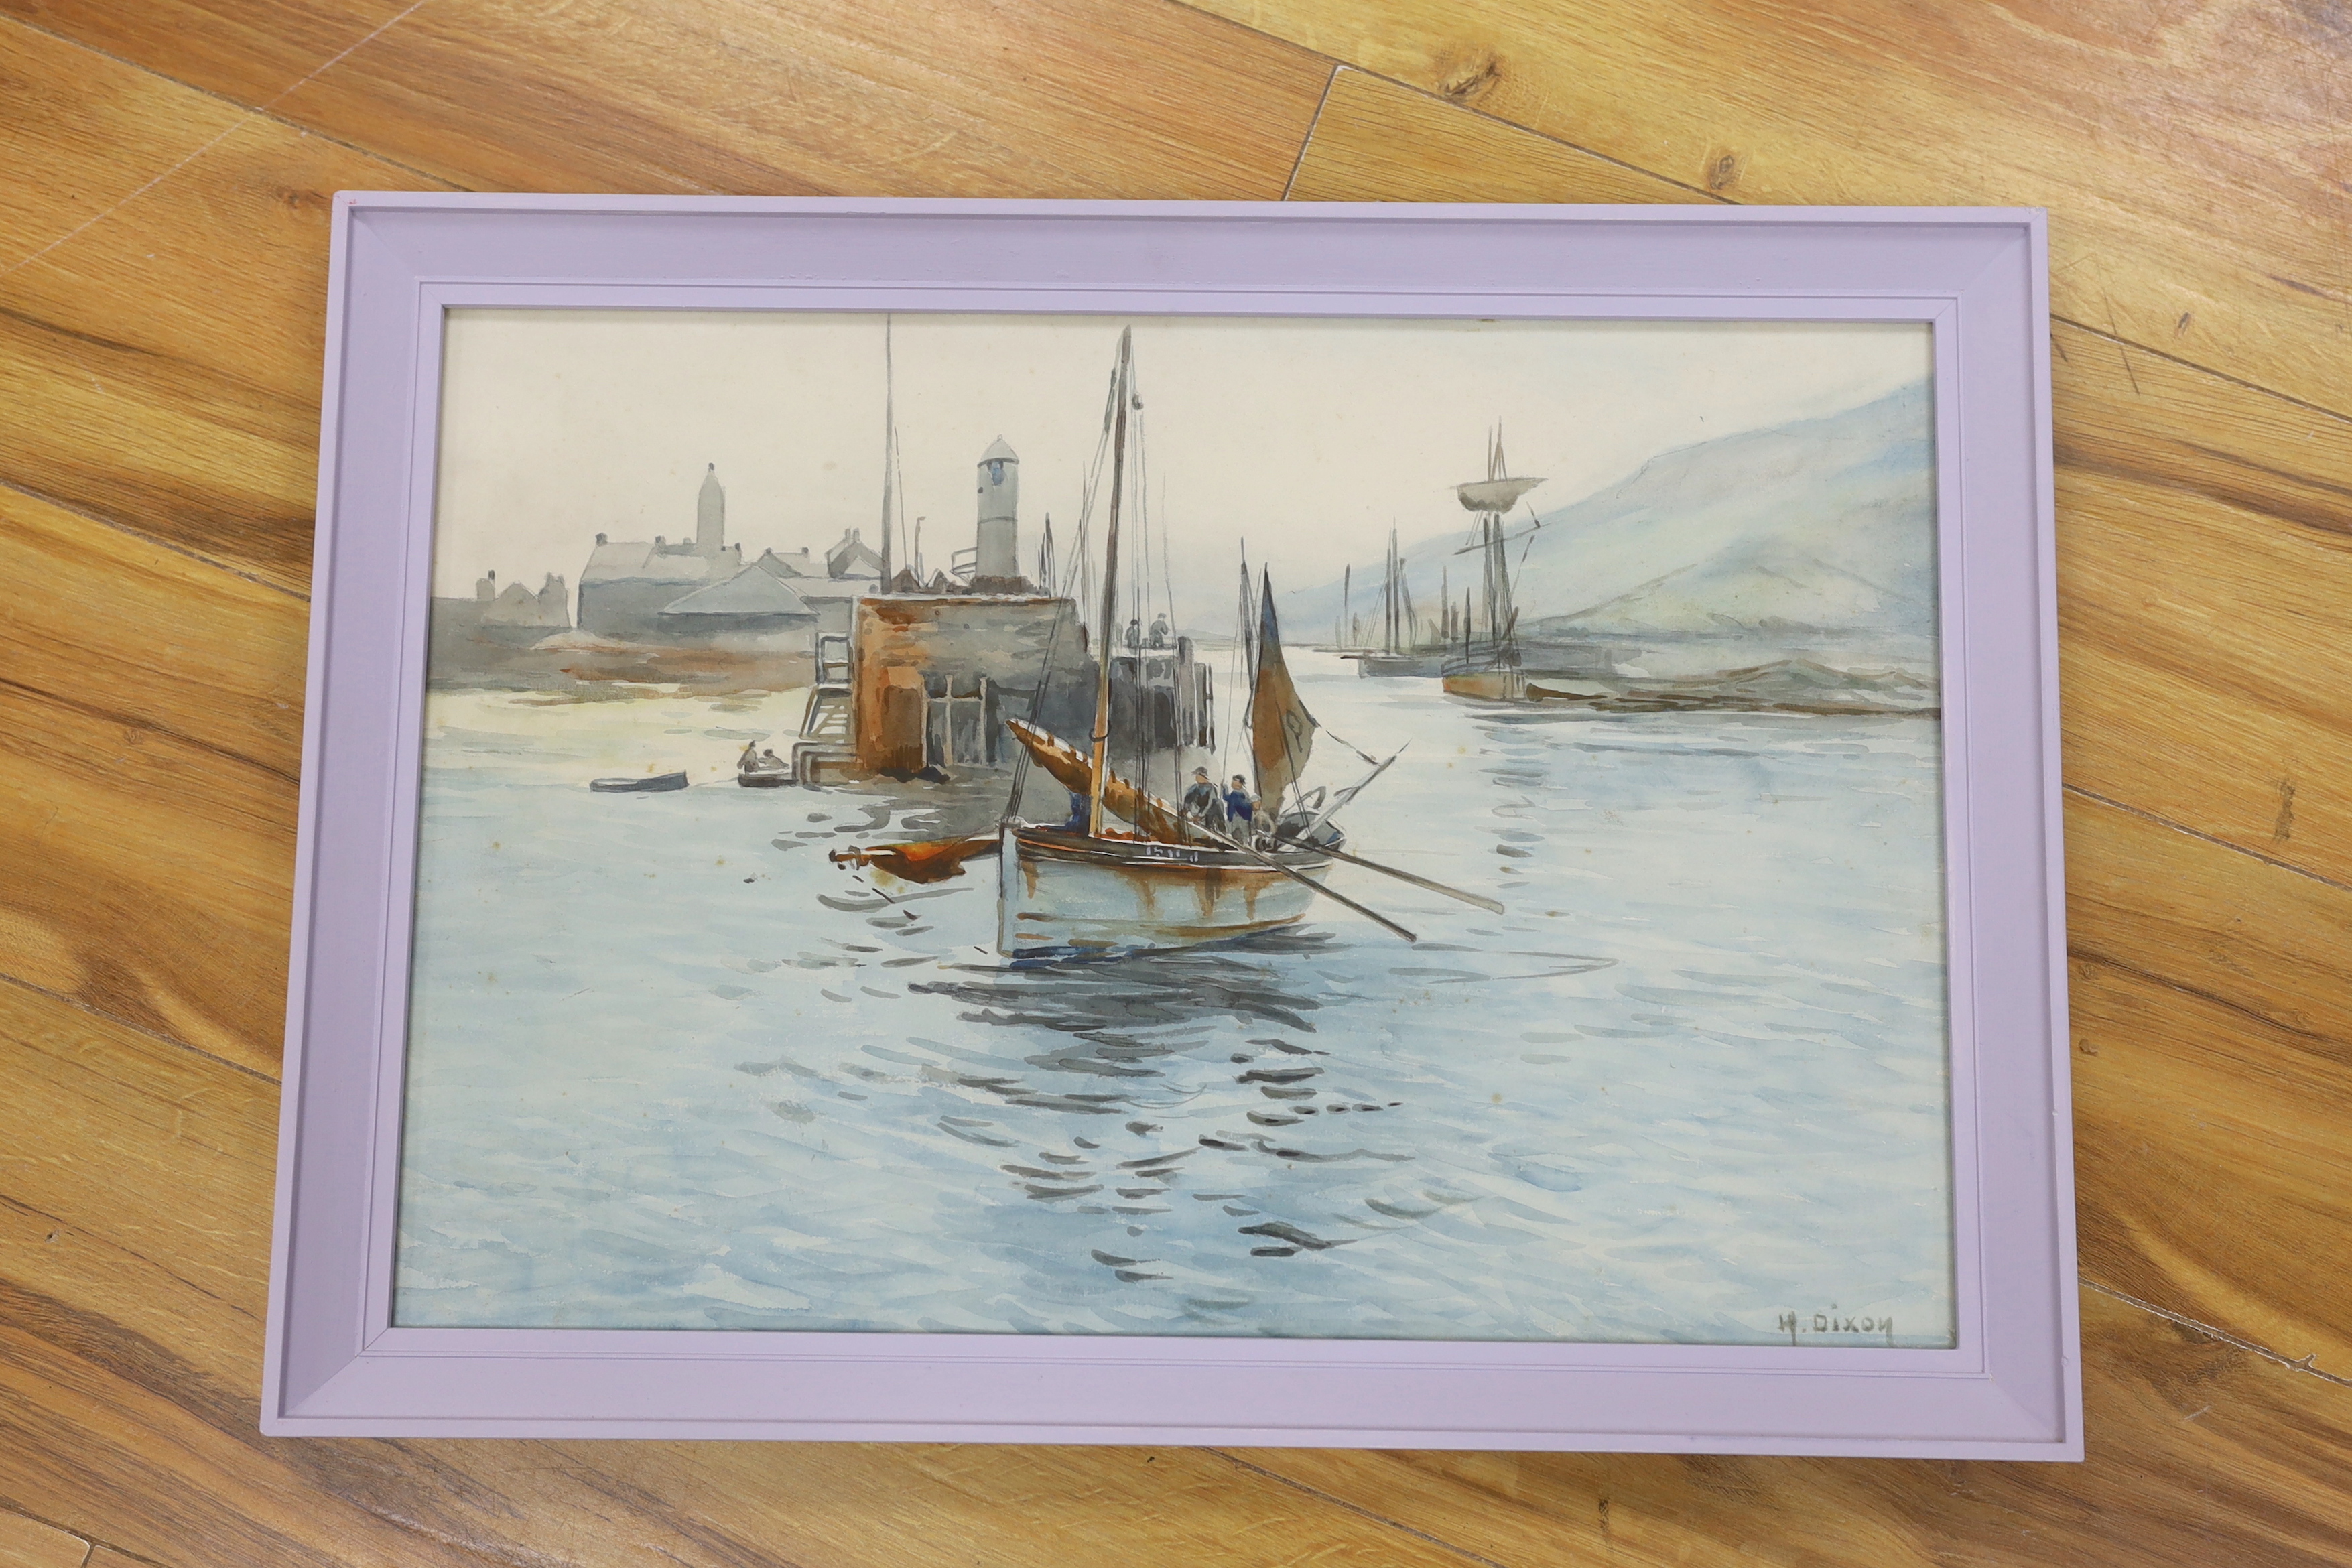 H Dixon, watercolour, Estuary scene with fishing boats, signed, 36 x 52cm - Image 2 of 4